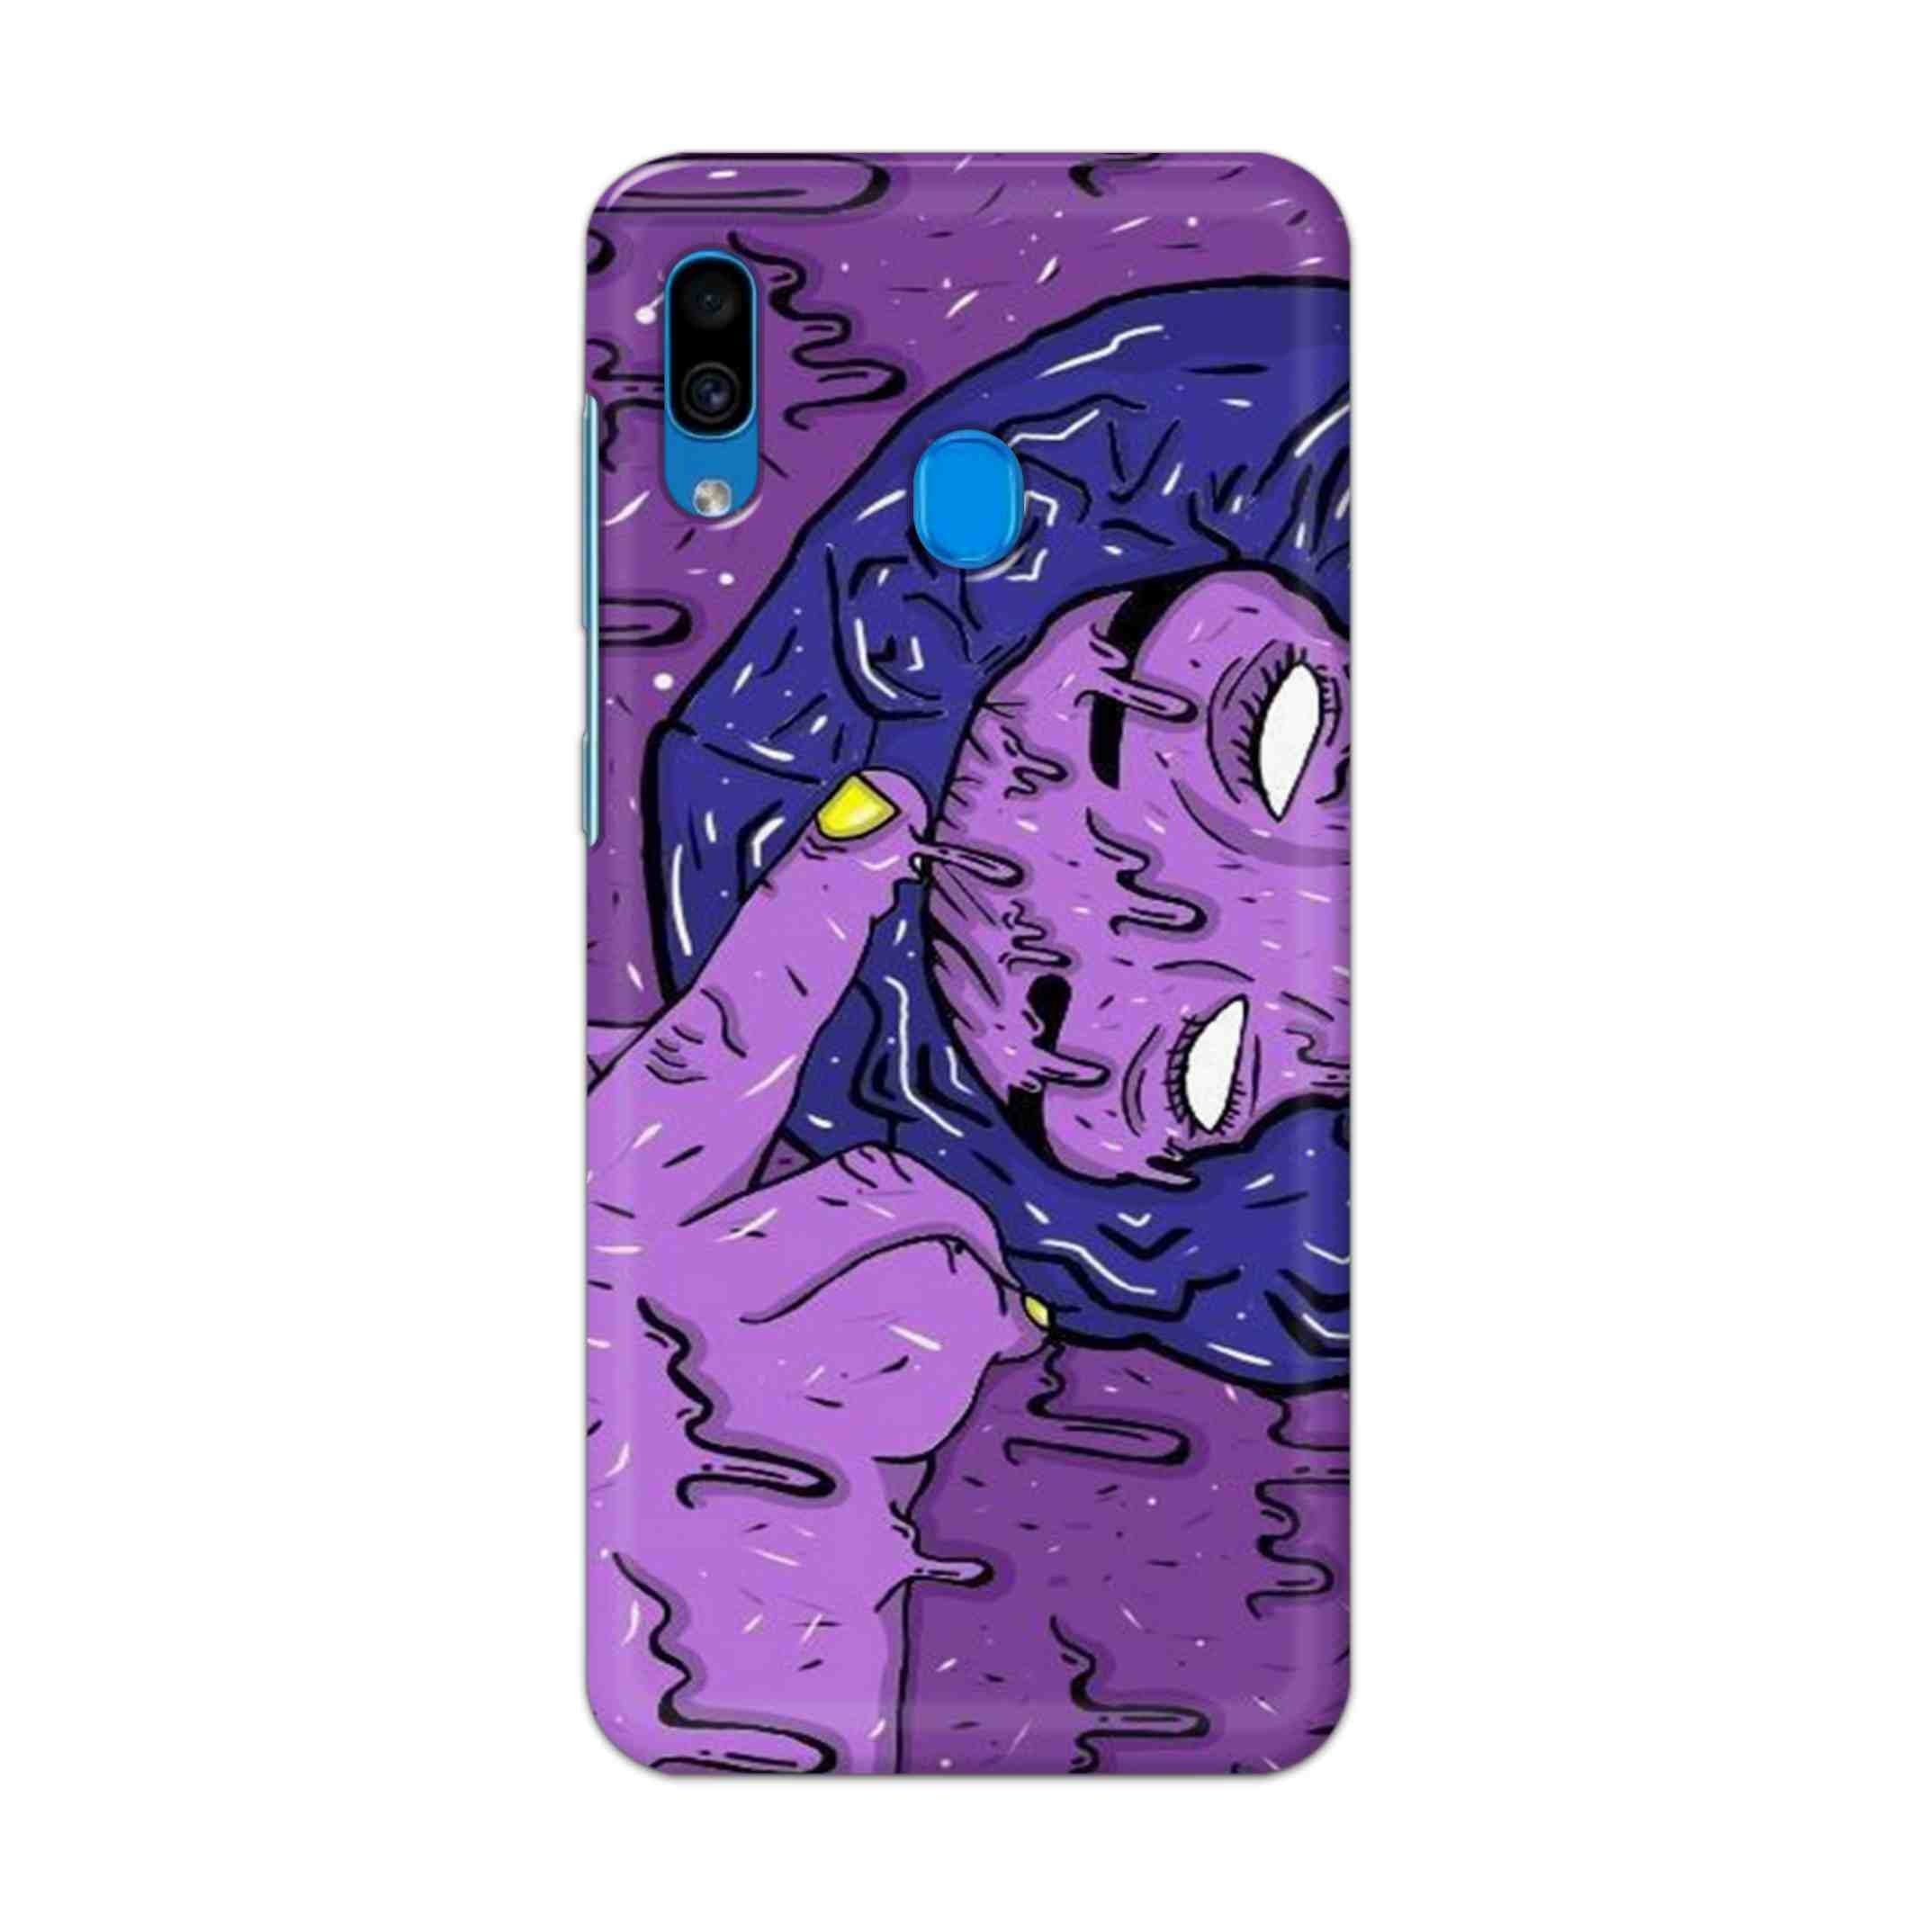 Buy Dashing Art Hard Back Mobile Phone Case Cover For Samsung Galaxy A30 Online